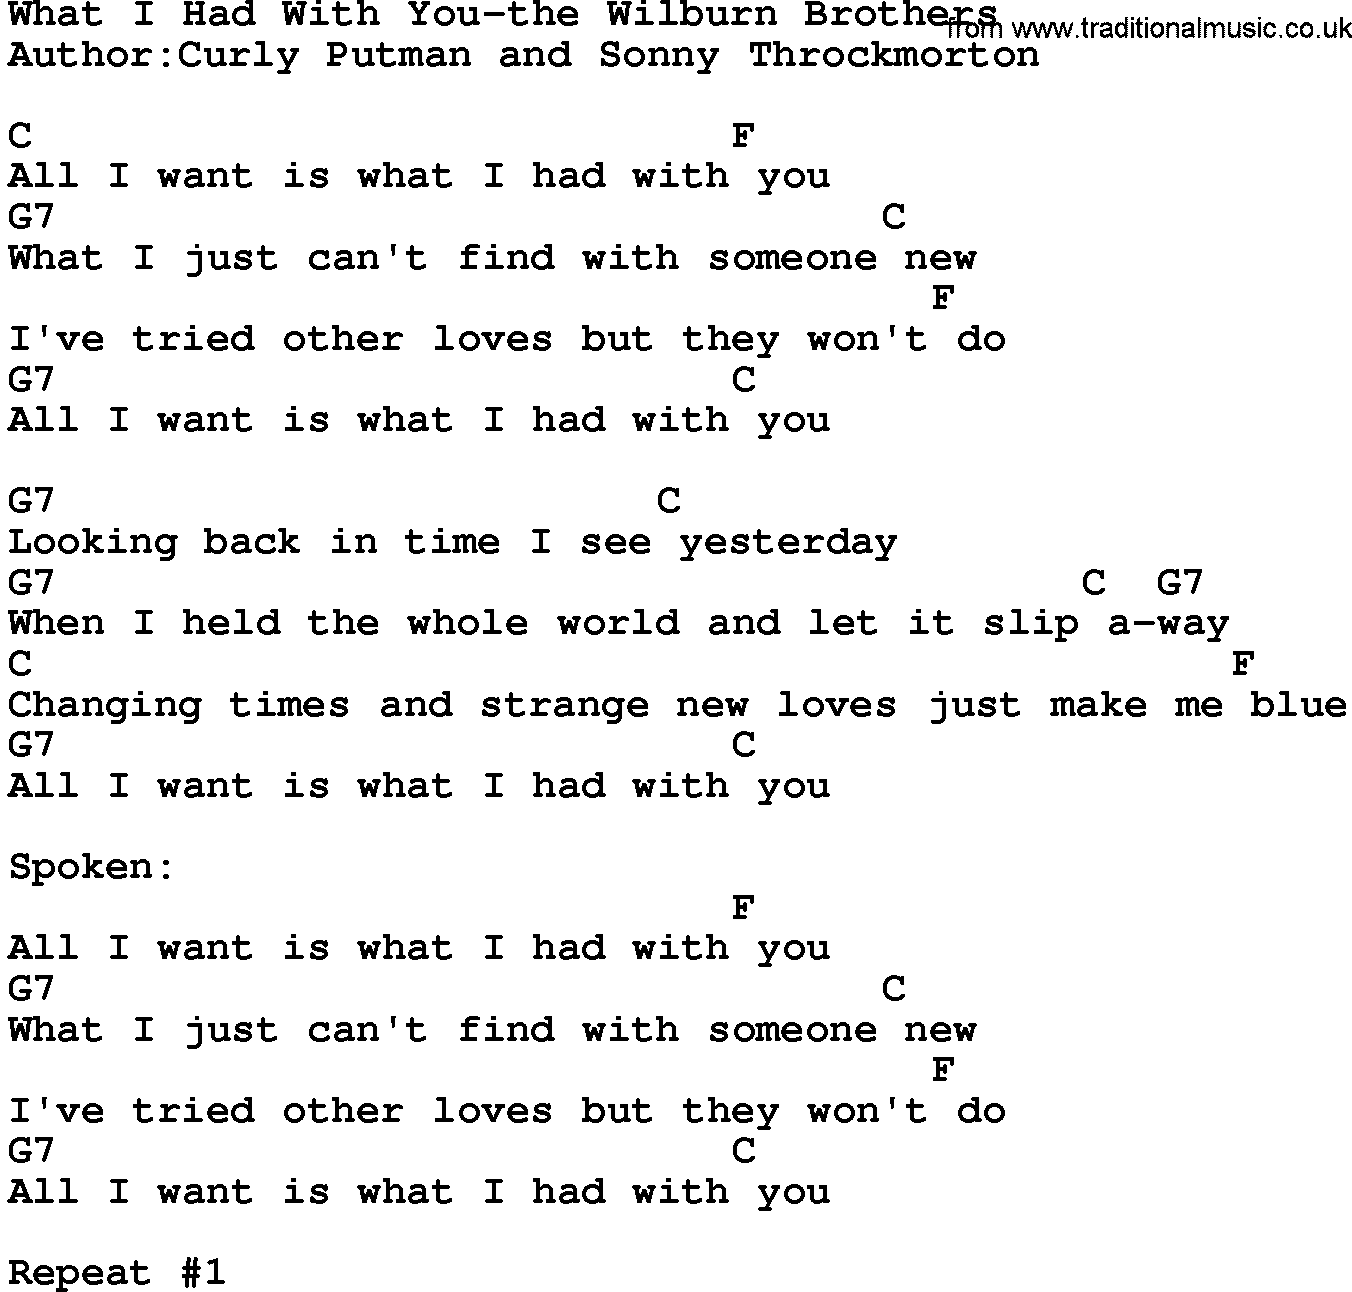 Country music song: What I Had With You-The Wilburn Brothers lyrics and chords